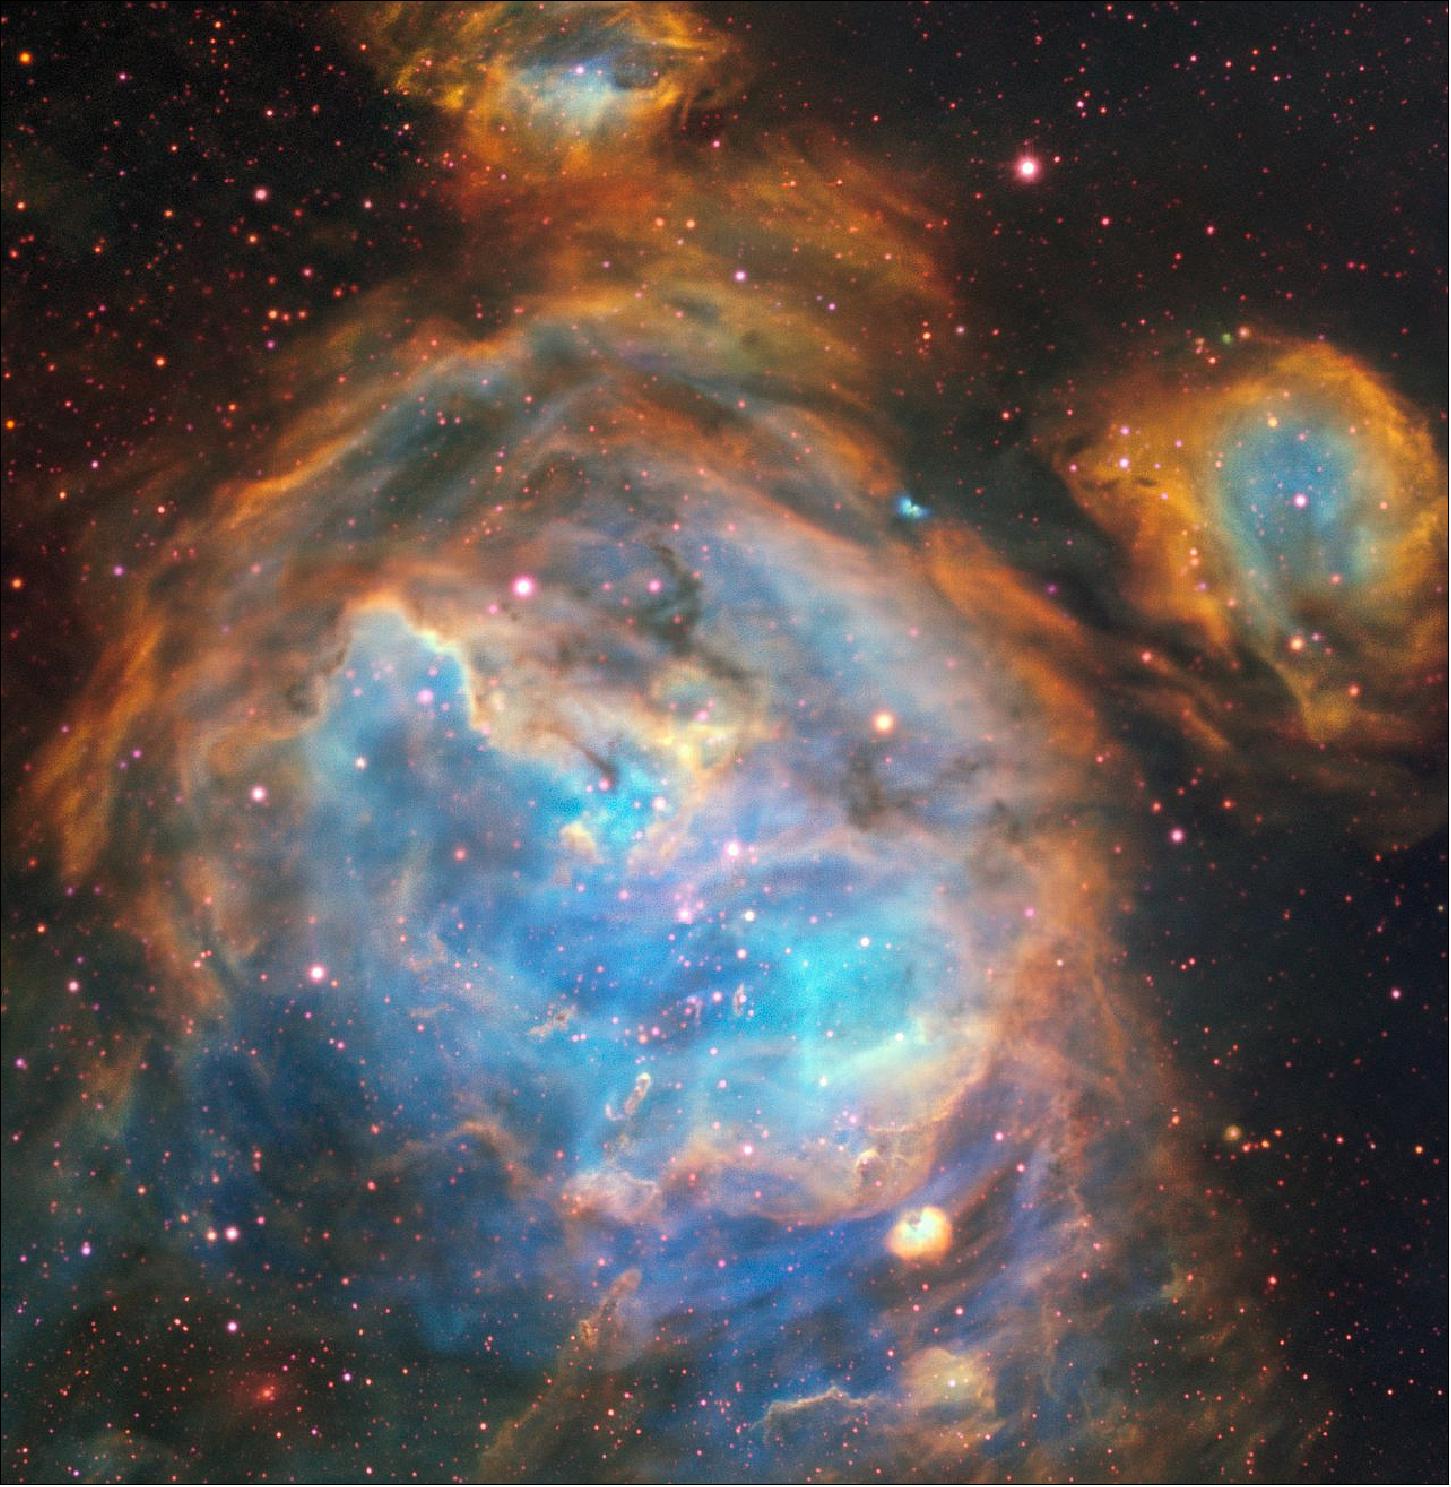 Figure 55: This dazzling region of newly-forming stars in the Large Magellanic Cloud (LMC) was captured by the MUSE (Multi Unit Spectroscopic Explorer) instrument on ESO’s Very Large Telescope. The relatively small amount of dust in the LMC and MUSE’s acute vision allowed intricate details of the region to be picked out in visible light (image credit: ESO, A McLeod, et al.)